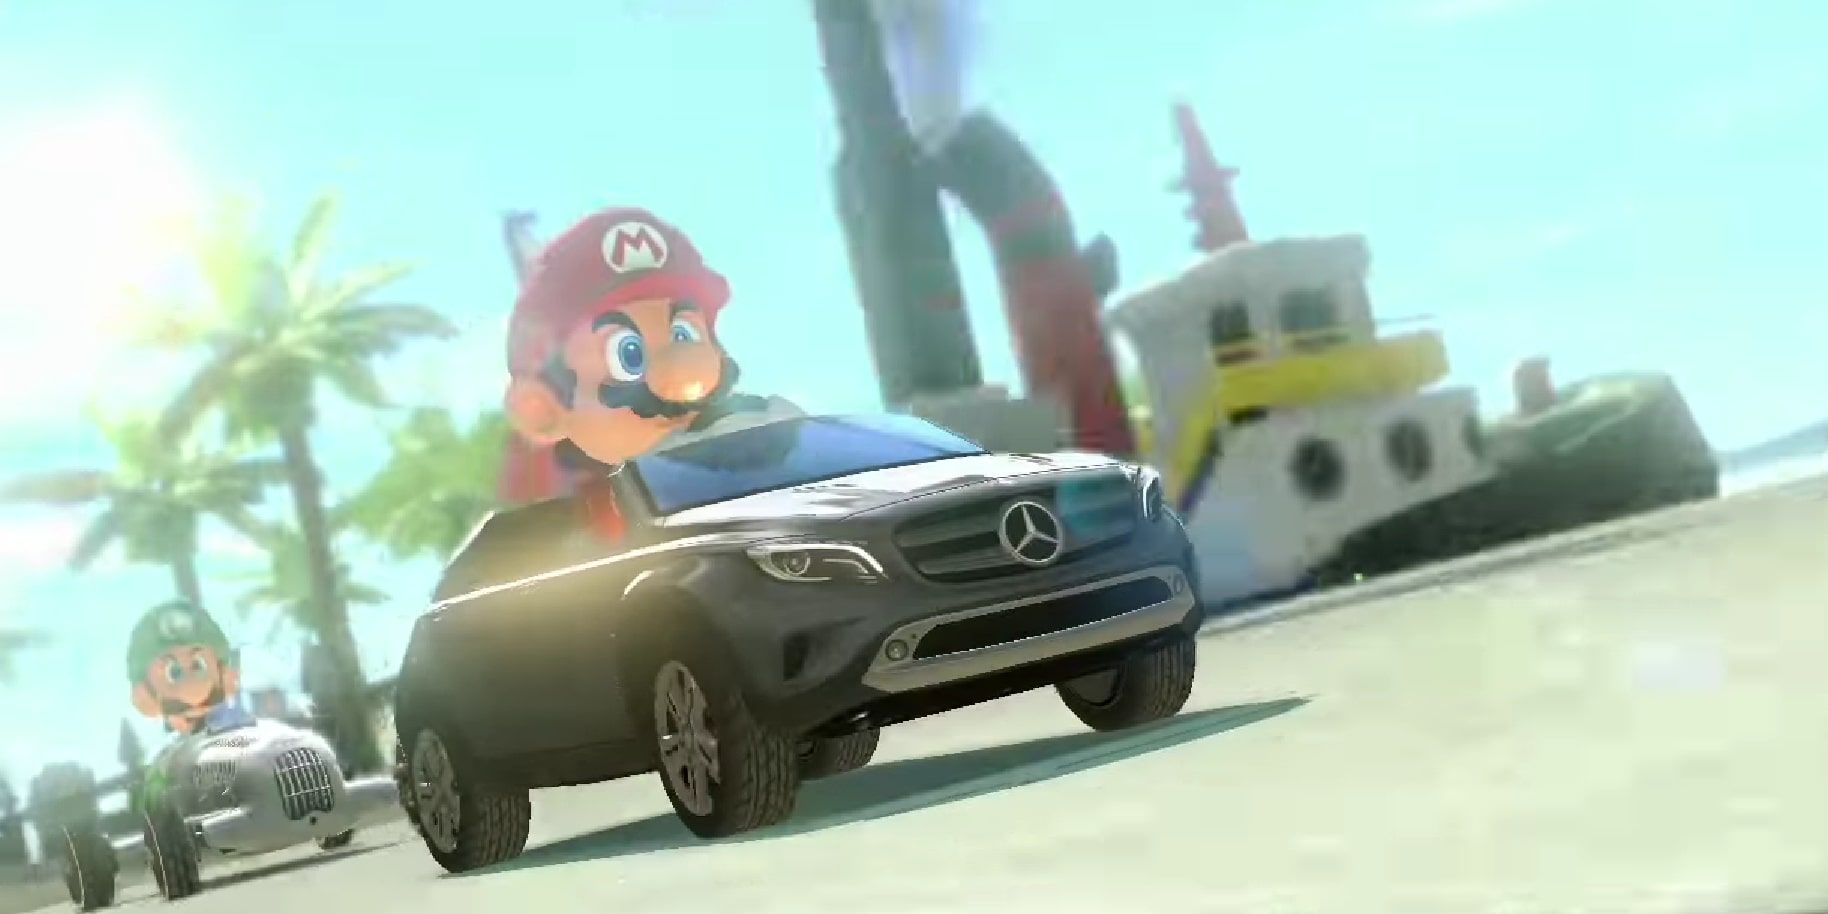 Mario and Luigi racing on a beachside track in Mercedes-Benz karts, with Mario on the GLA and Luigi on the W25.